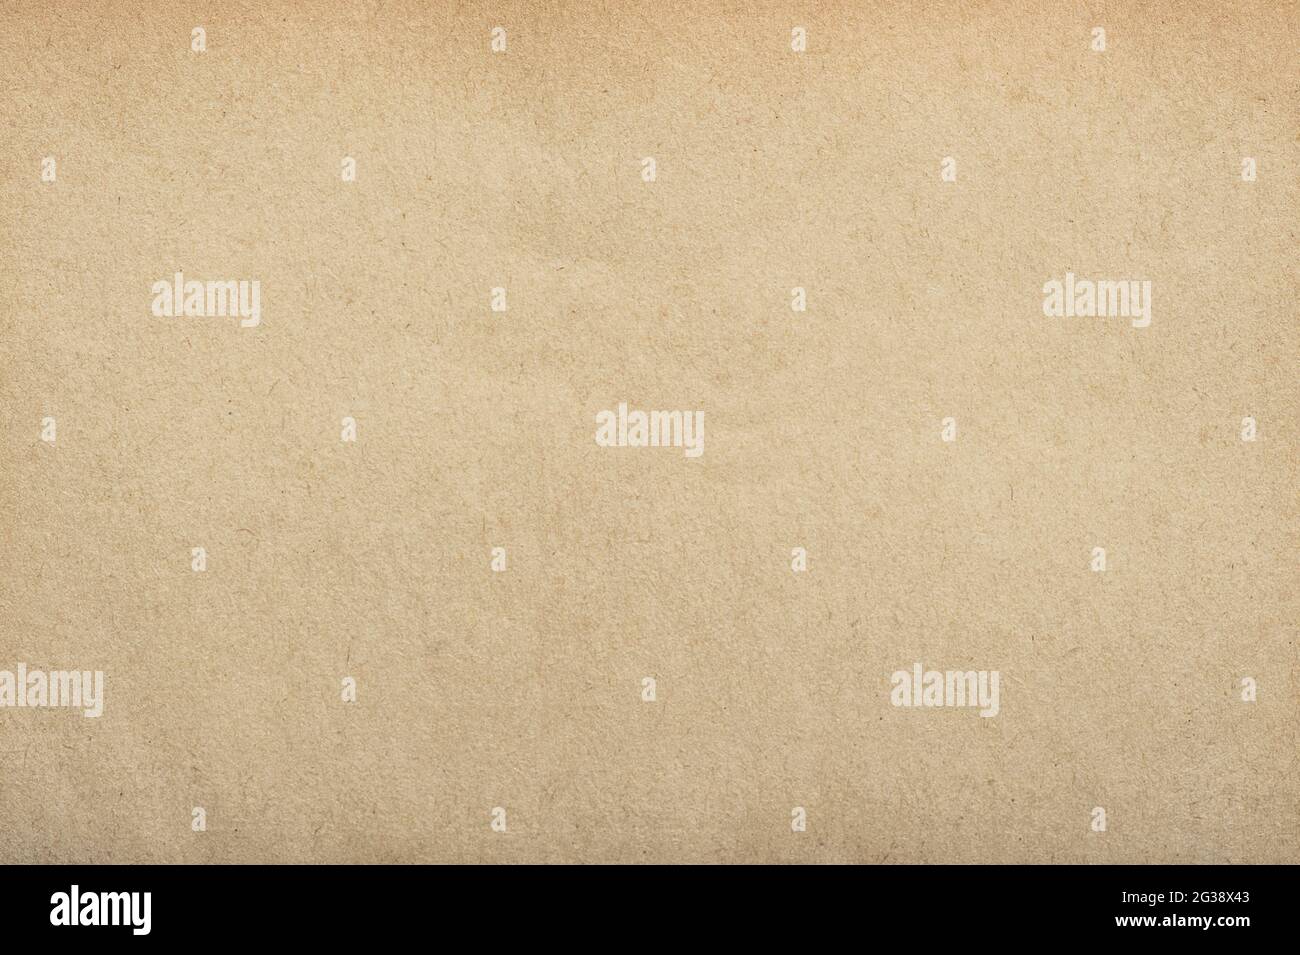 Vintage old paper texture background for decoupage crafting scrapbooking Stock Photo